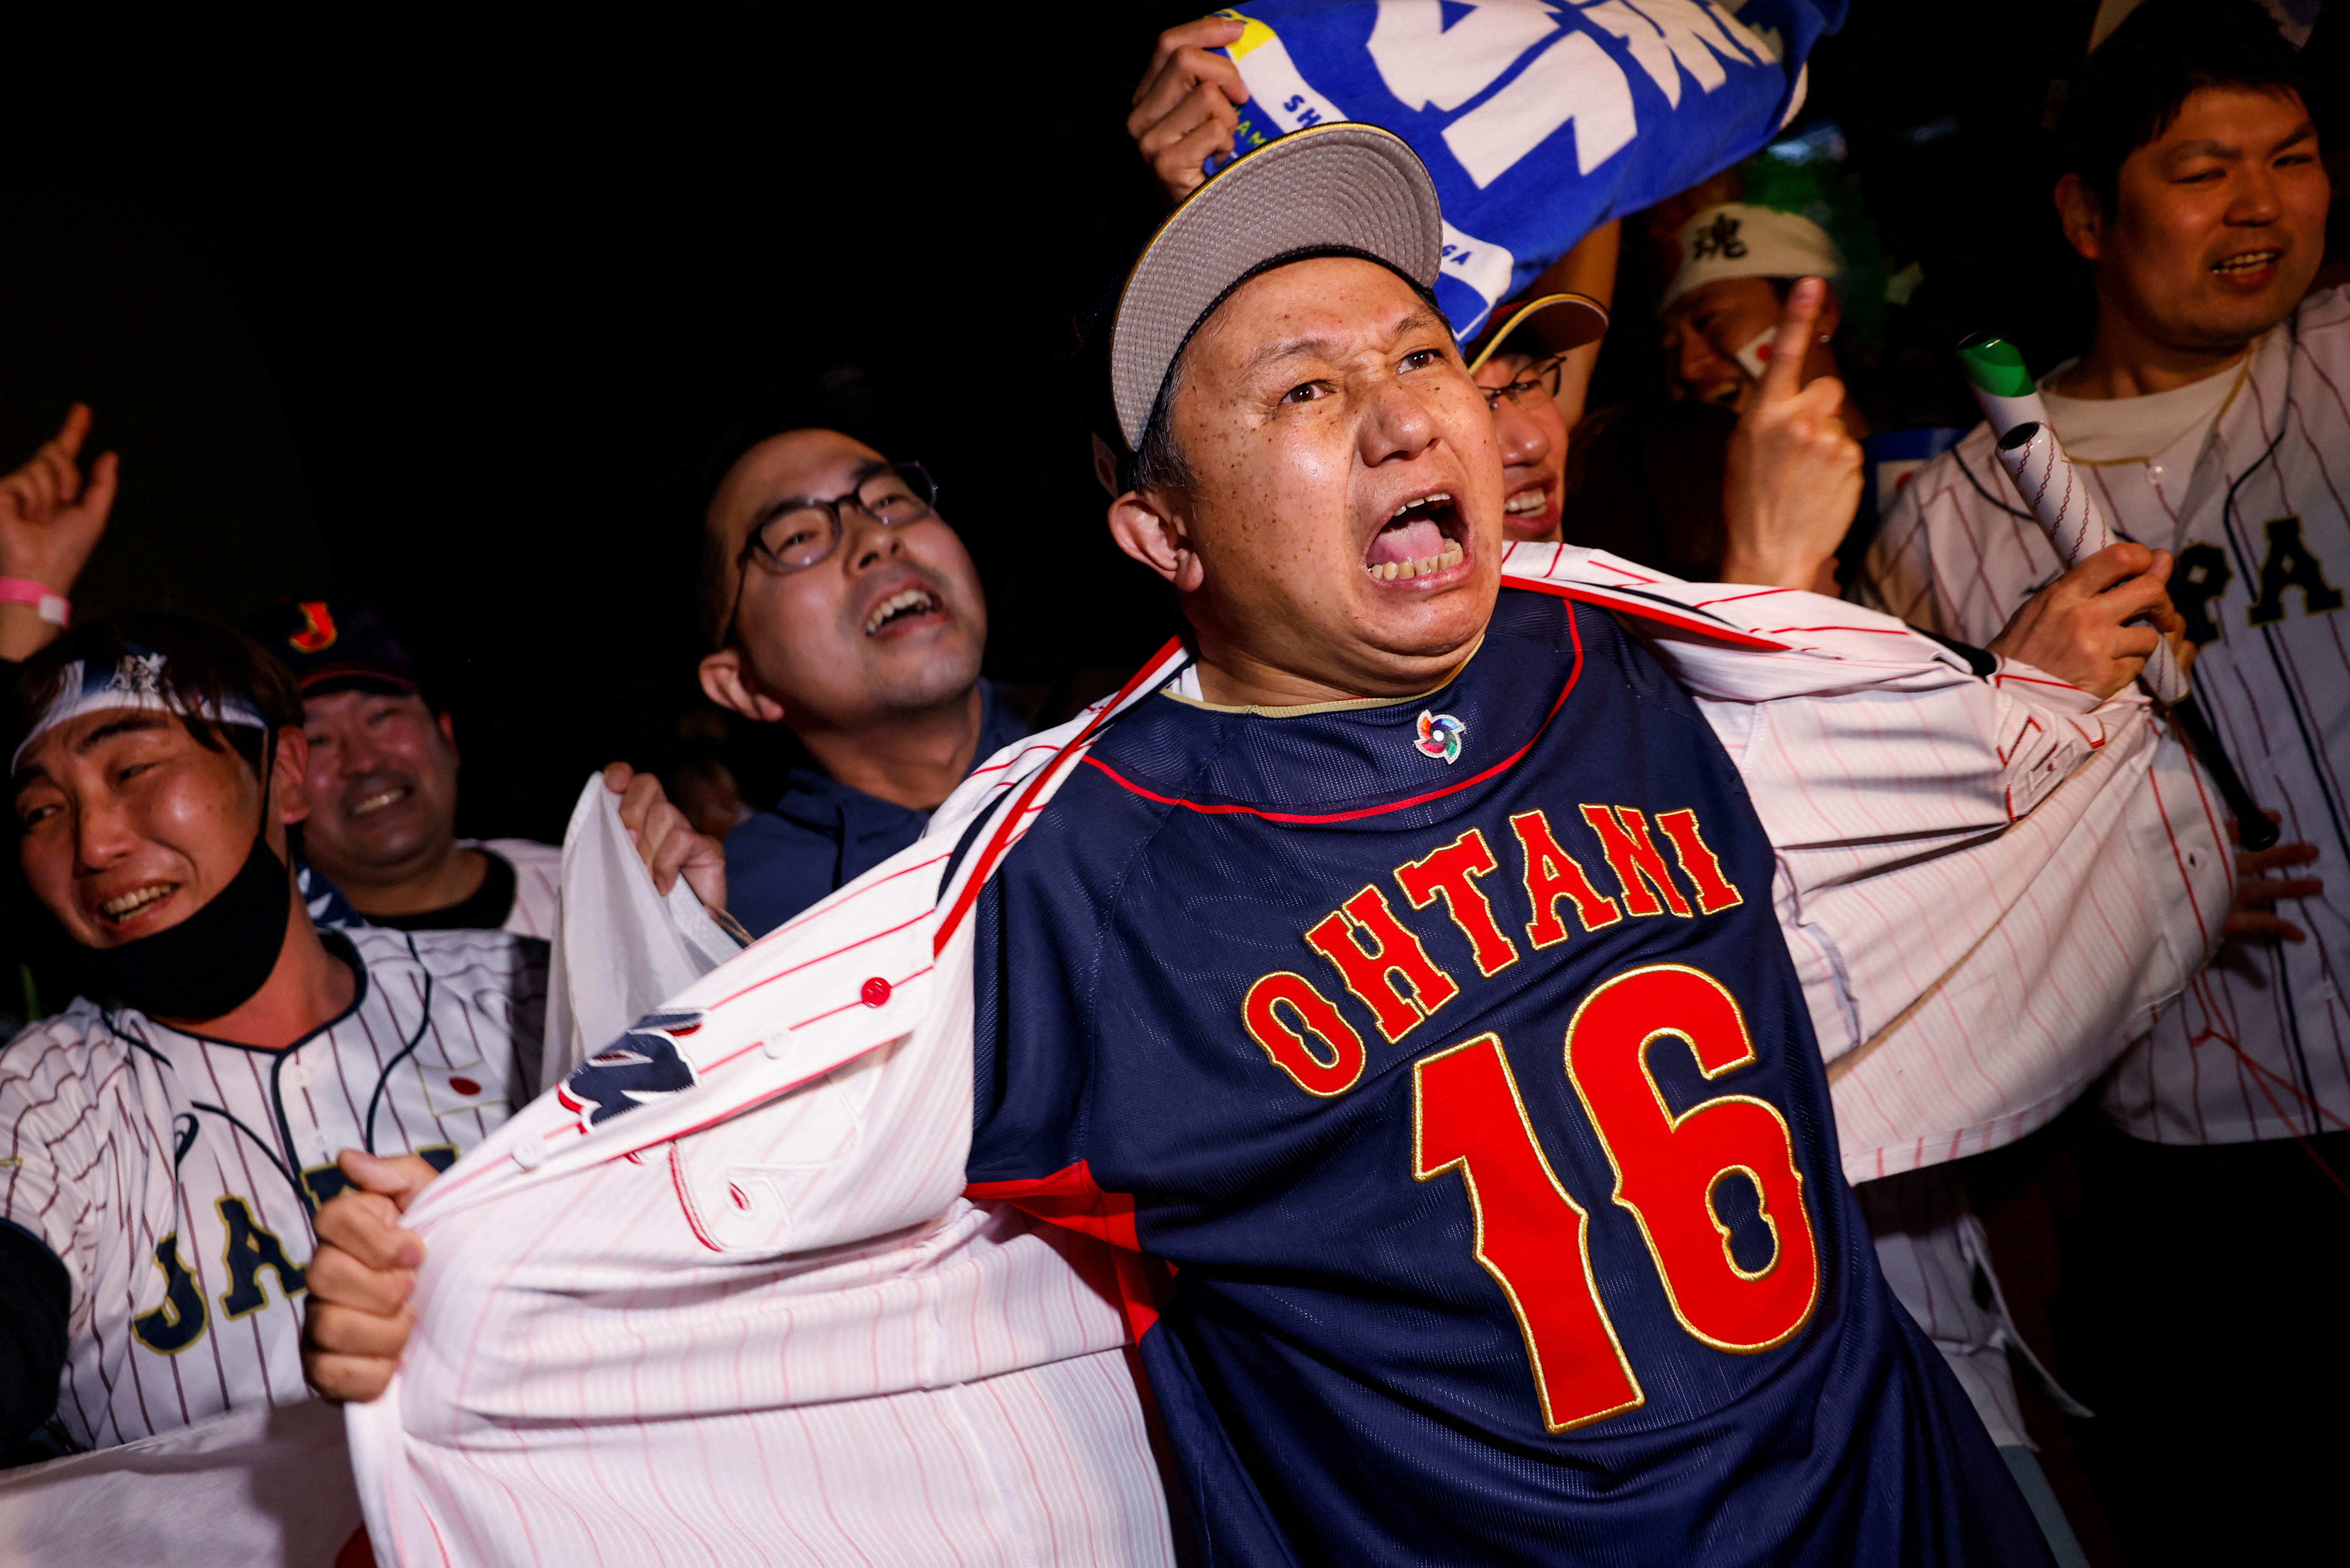 Reactions during the World Baseball Classic final game between U.S. and Japan in Tokyo